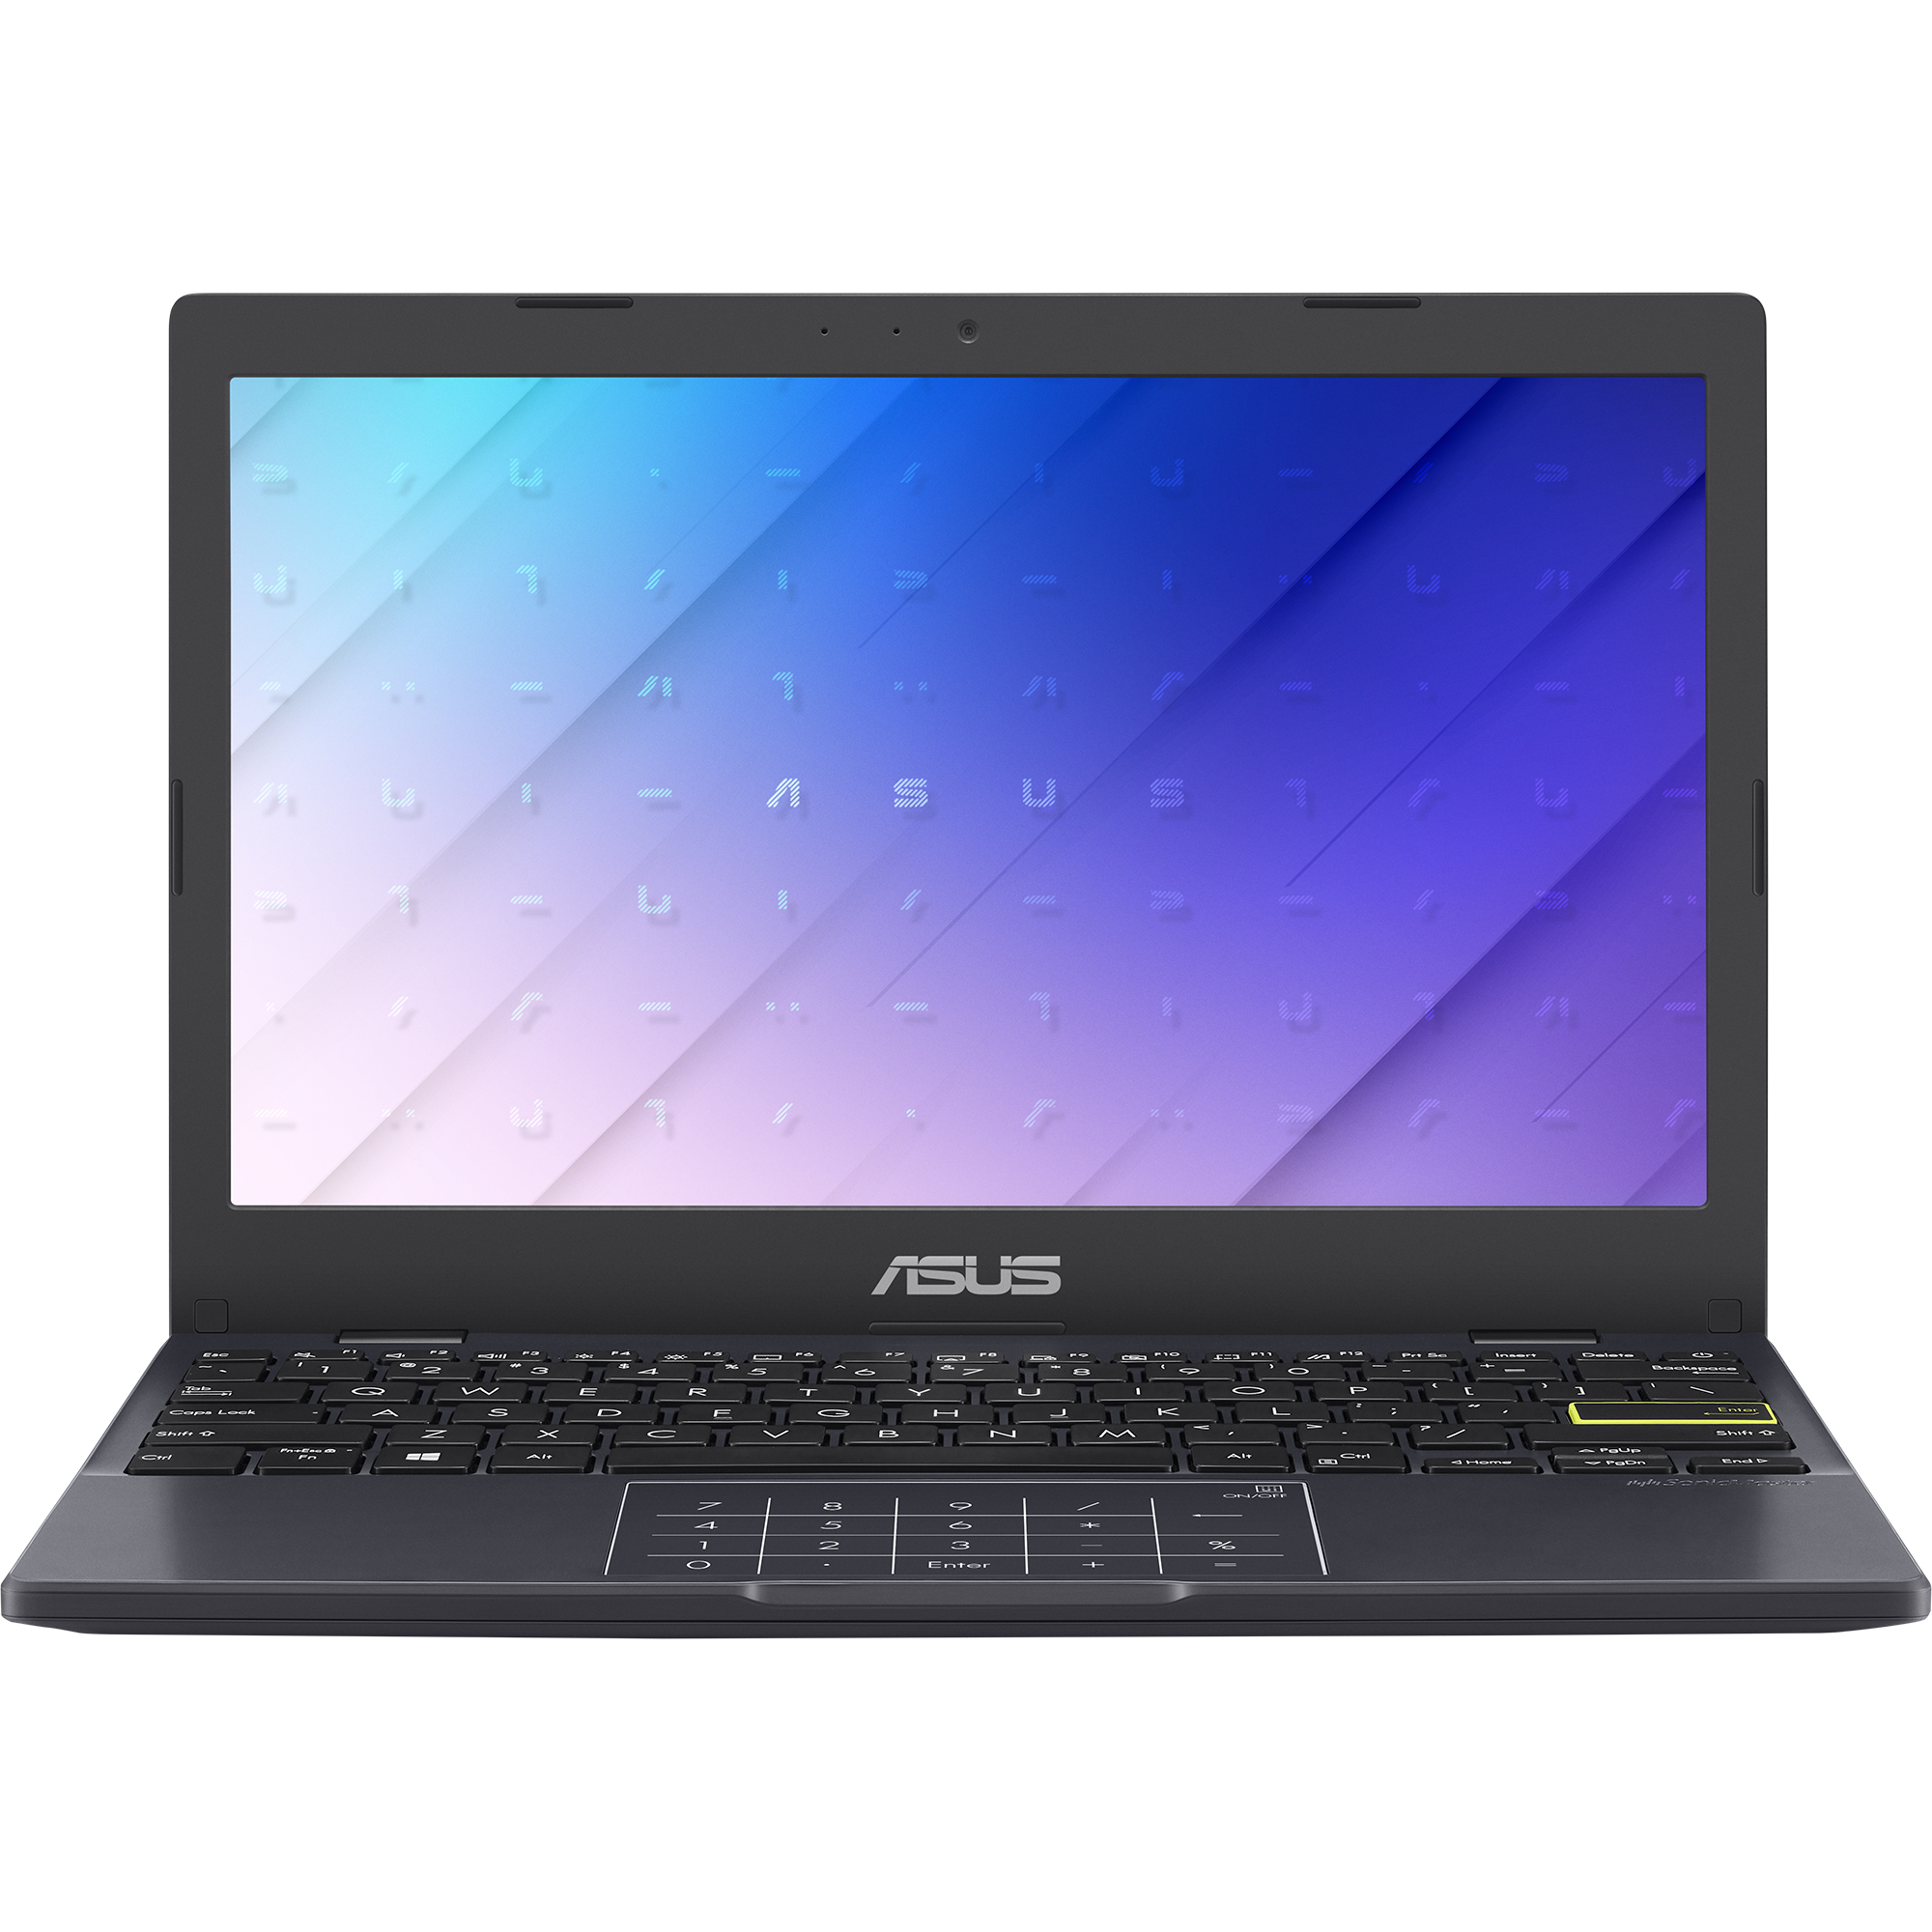 Asus E210MA 11.6" Laptop includes Includes Microsoft 365 Personal 12-month subscription with 1TB Cloud Storage - Blue